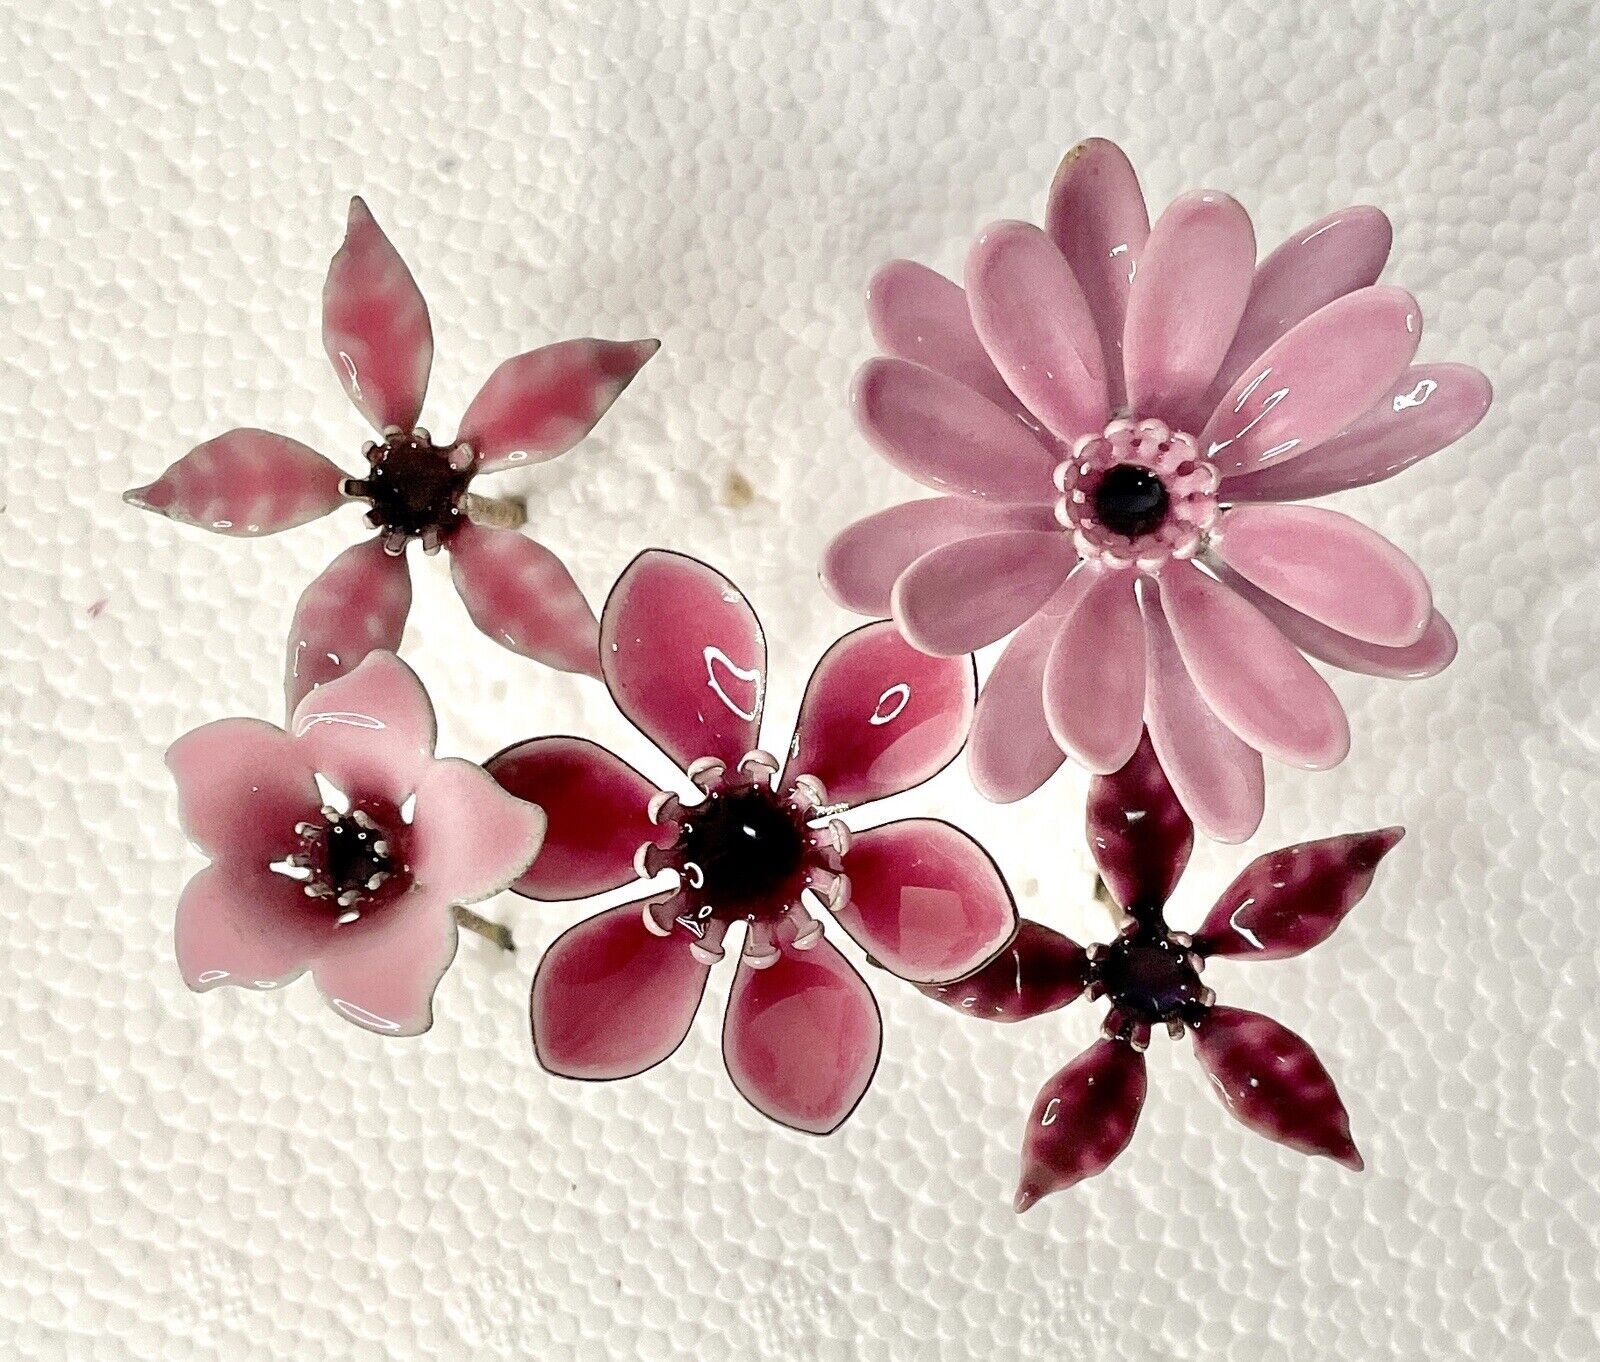 Vintage Bovano Of Cheshire Enamel & Copper Metal Flowers 5 Pink Stemmed Blossoms